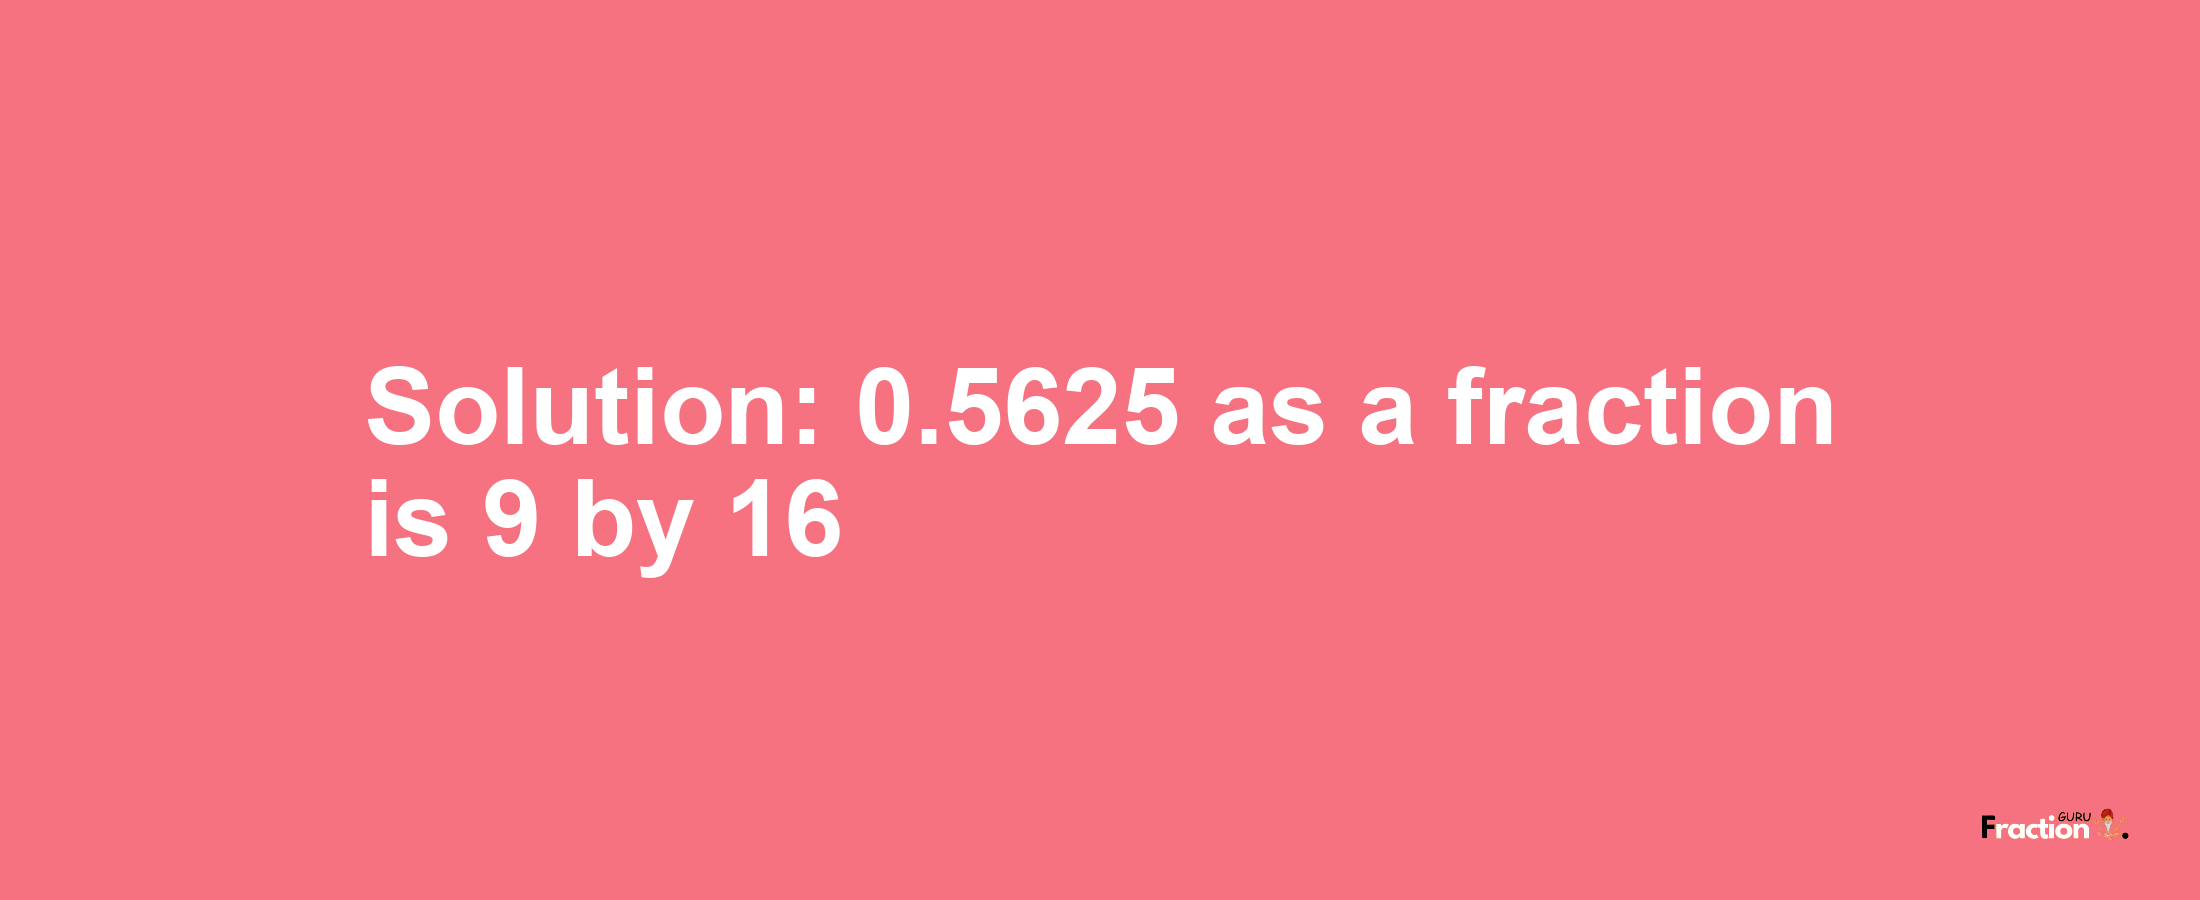 Solution:0.5625 as a fraction is 9/16